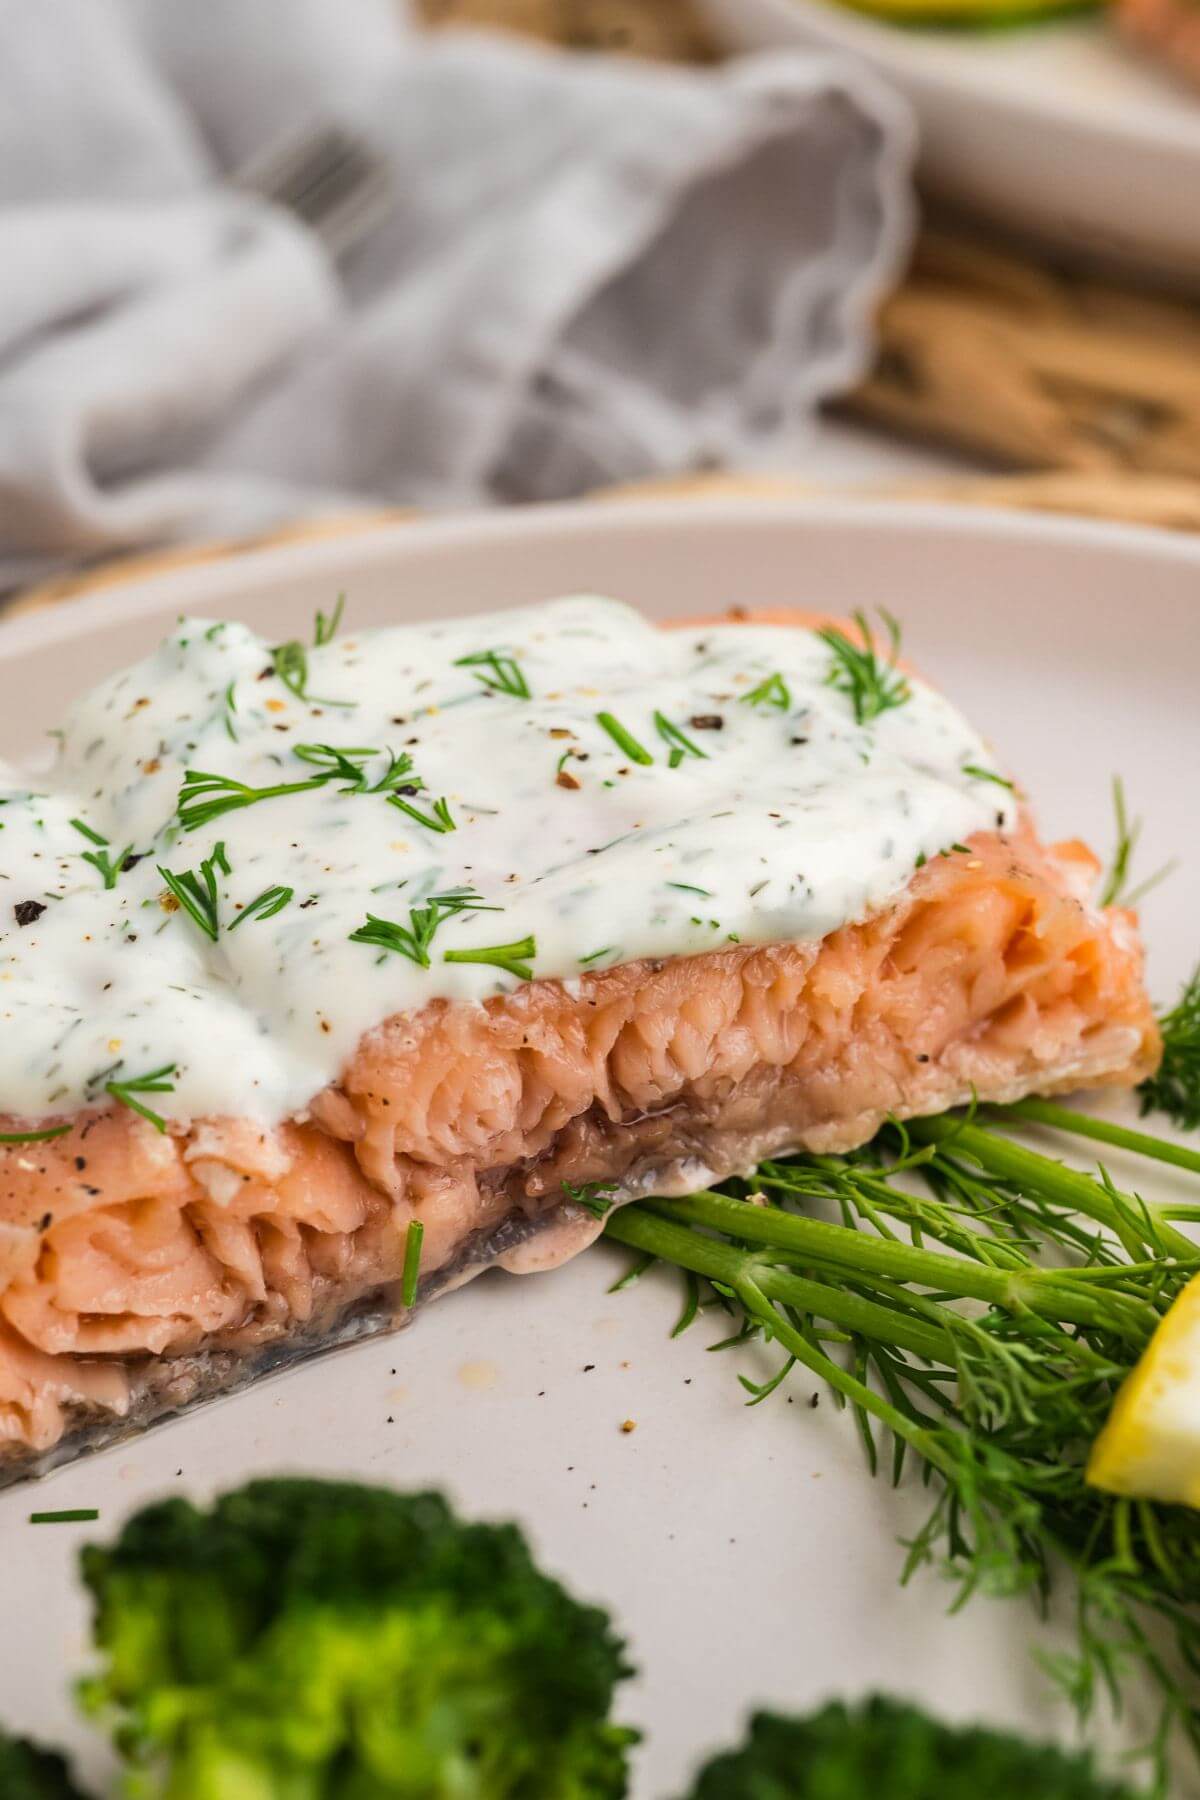 A large piece of cooked salmon is shown up close focusing on the tender inside and dill sauce on top.